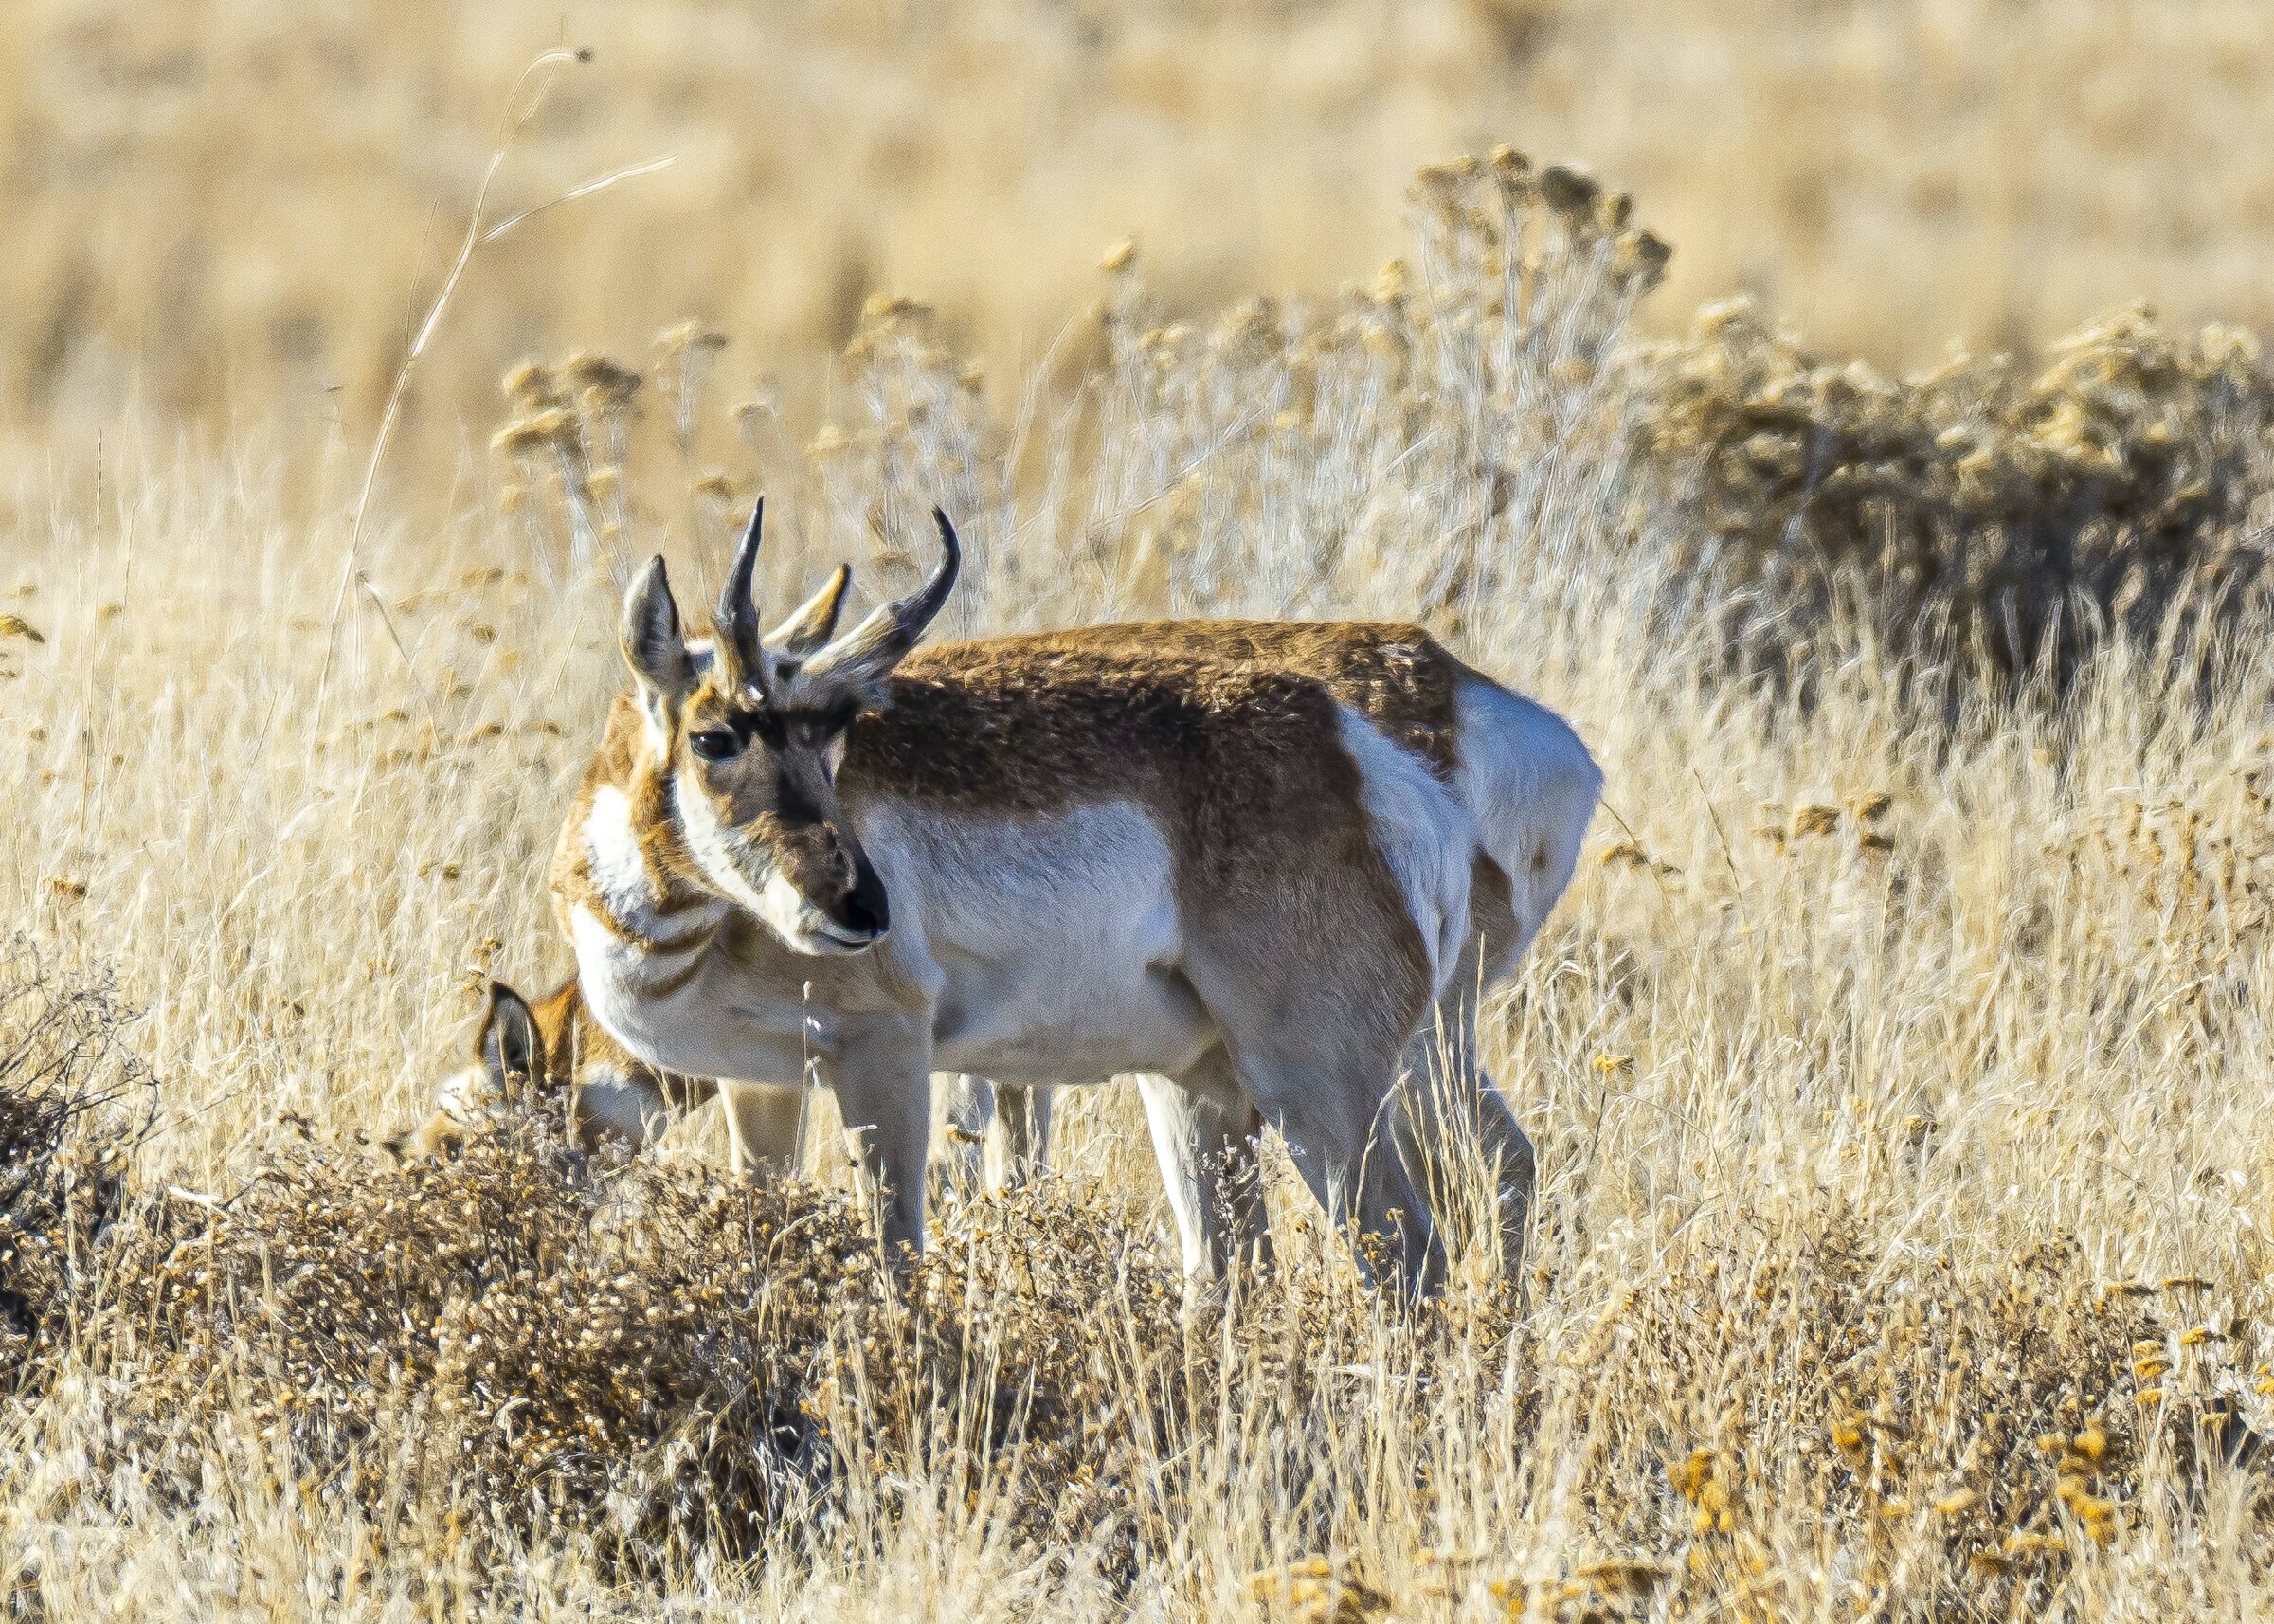 Two Pronghorn